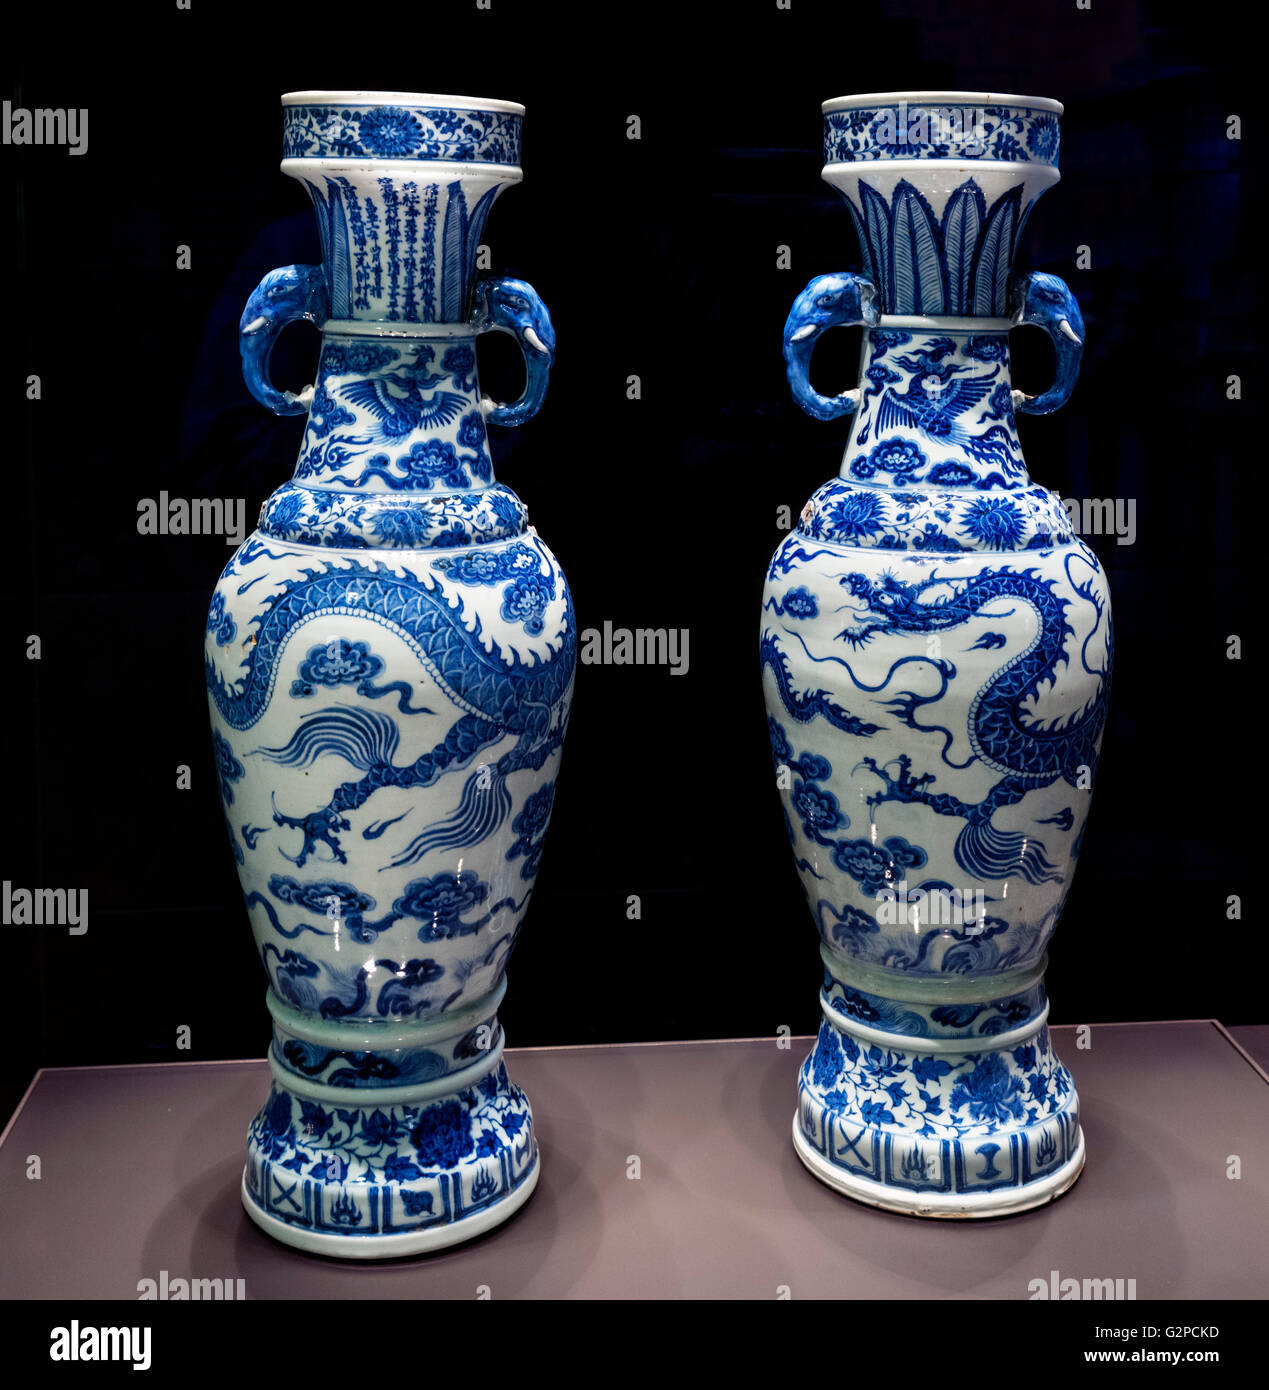 The 'David Vases', two of the best known pieces of Chinese ceramics. Large porcelain altar vases of ancient bronze form with two applied elephant head handles. Yuan Dynasty, made in Jingdezhe, 1351. Displayed in the British Museum, Bloomsbury, London, England, UK Stock Photo